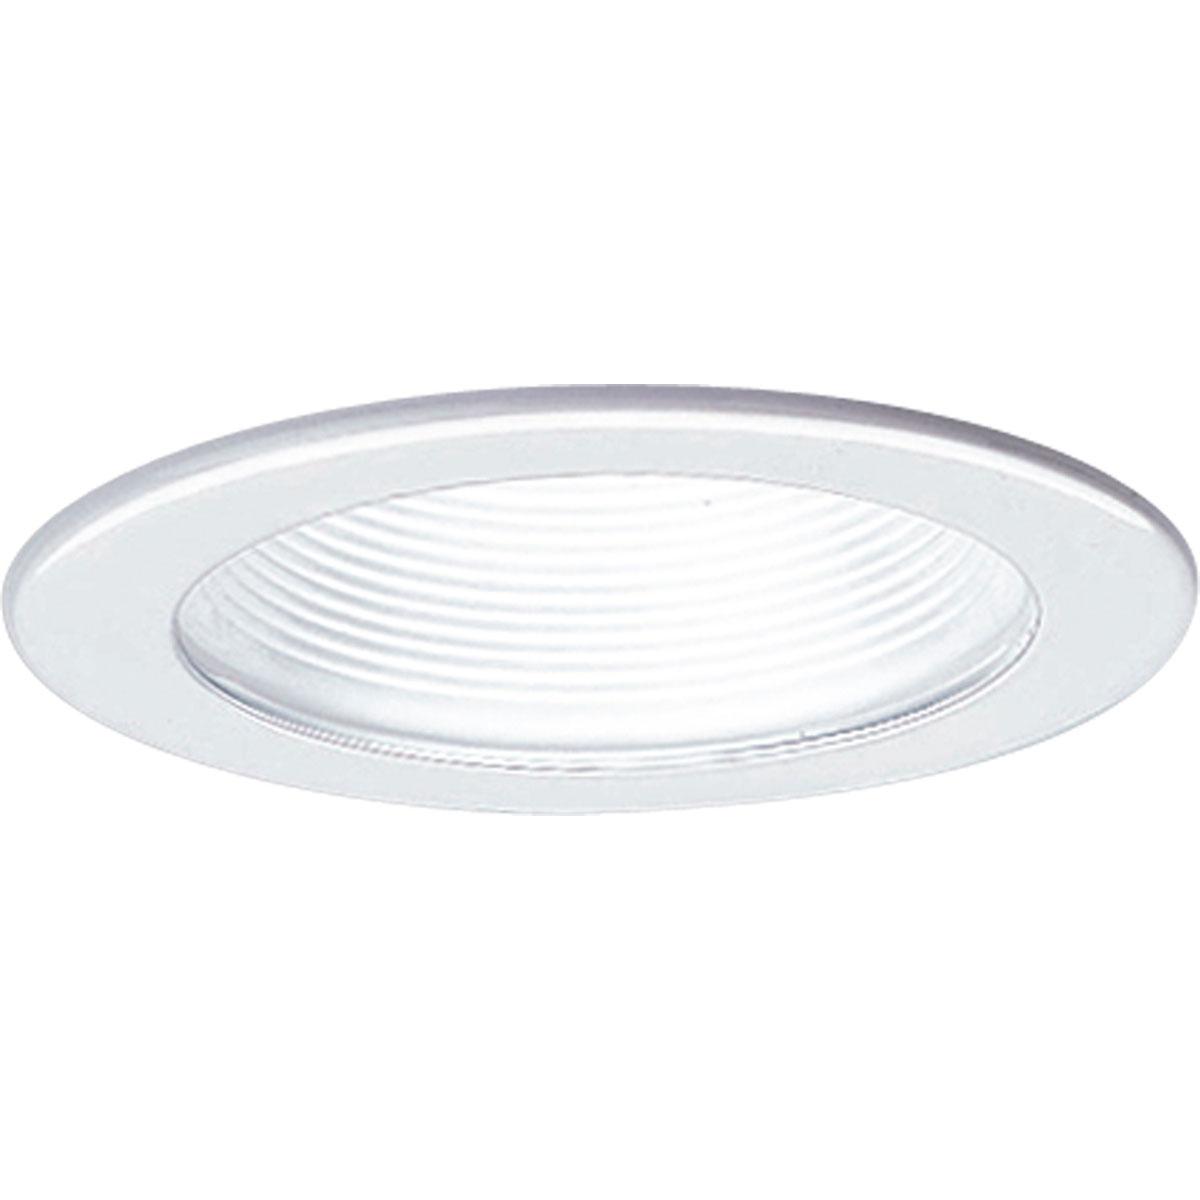 Hubbell P8044-28 4" Step Baffle trim in a White finish with white powder coated flanges to match the baffle finish. 360 positioning. 5" outside diameter.  ; White finish. ; White powder coated flange. ; No light leaks around trim flange.